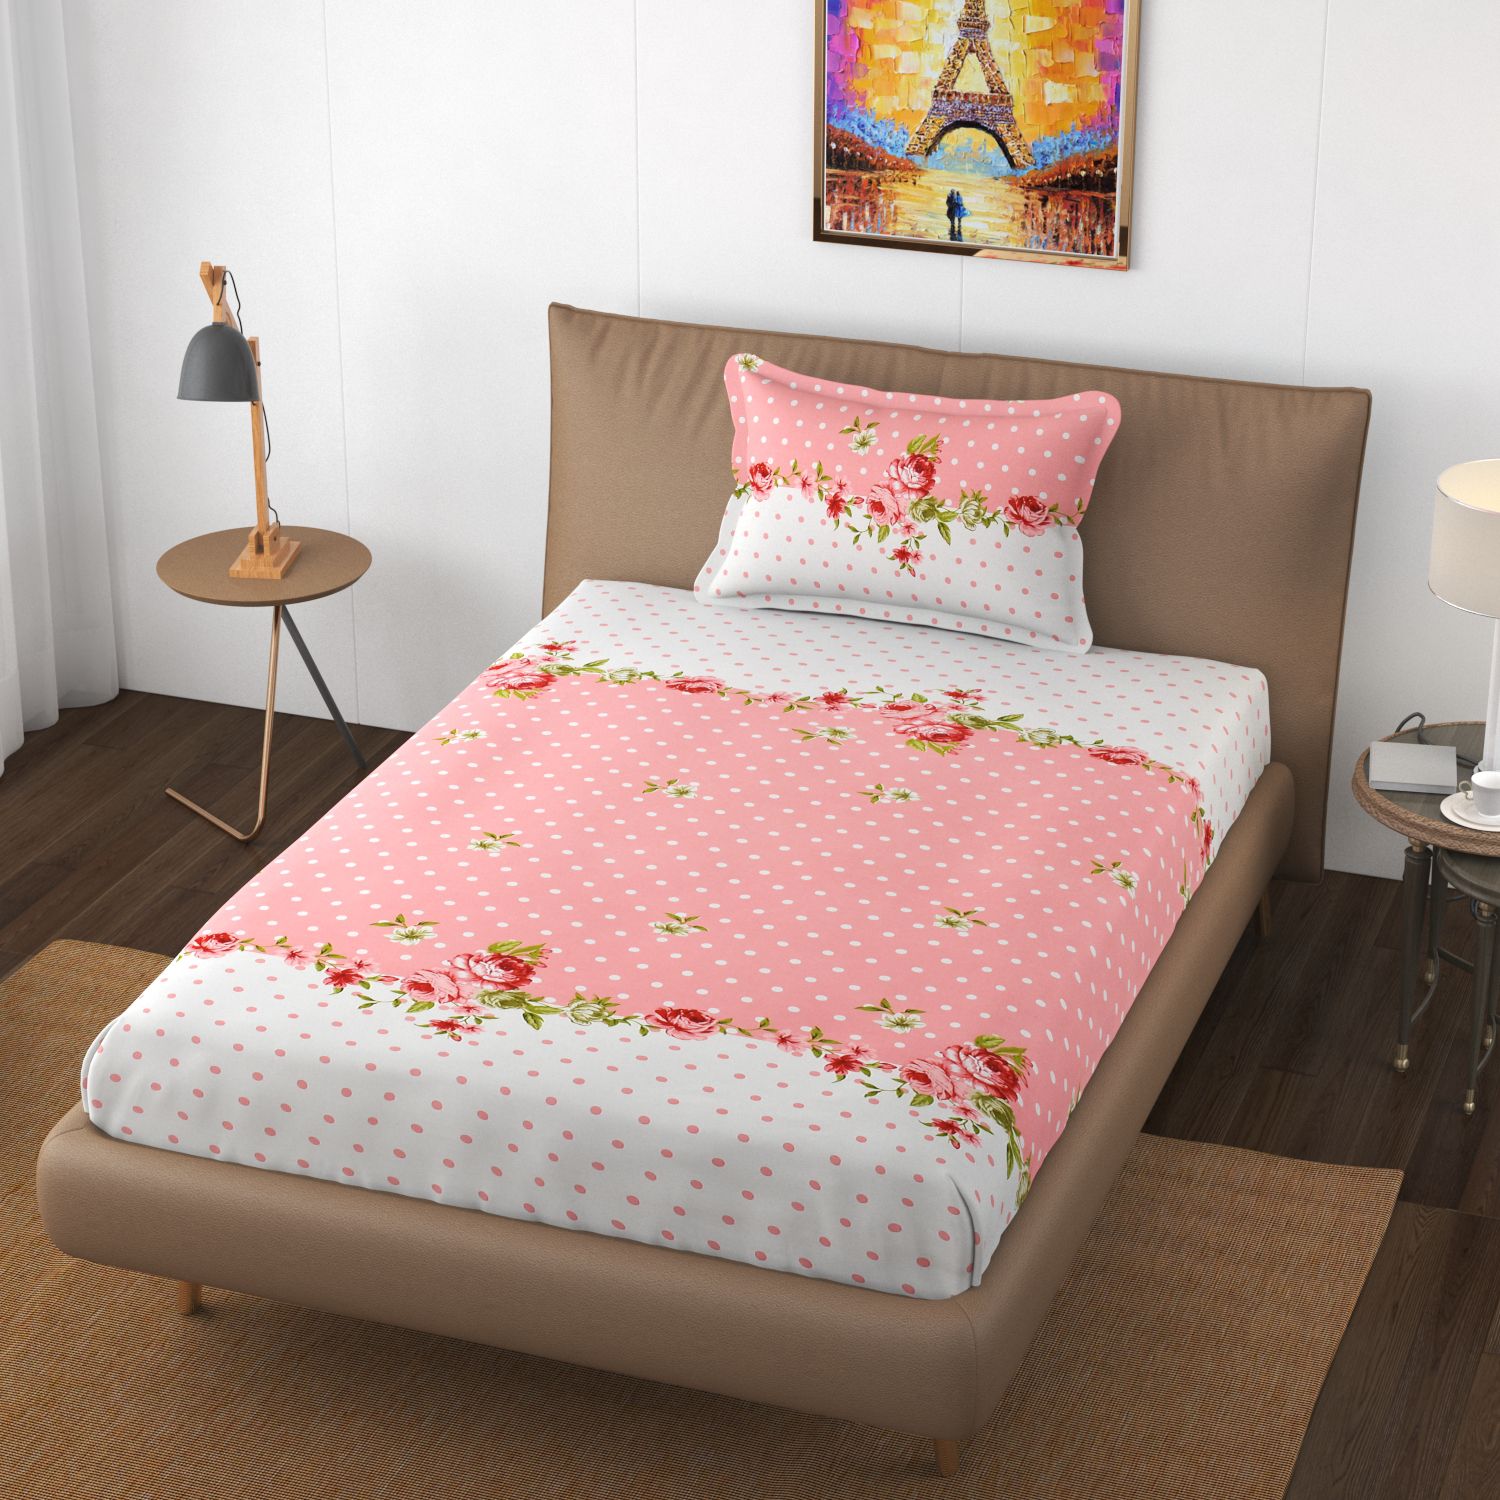     			Apala Microfiber Floral Single Bedsheet with 1 Pillow Cover - Pink